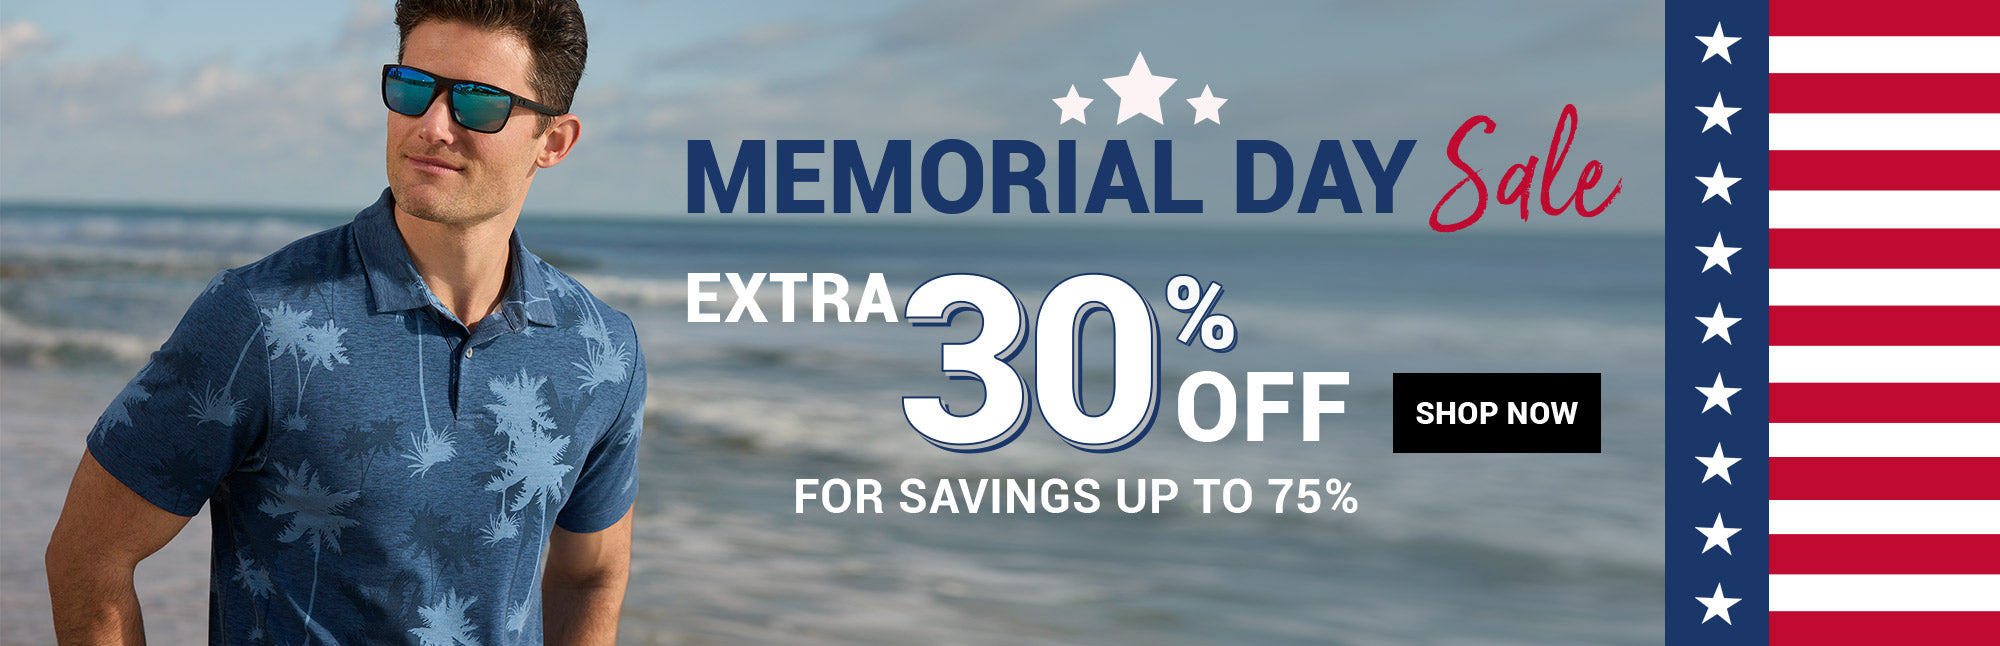 Memorial Day Sale | Extra 30% Off for Savings up to 75% - Shop Now